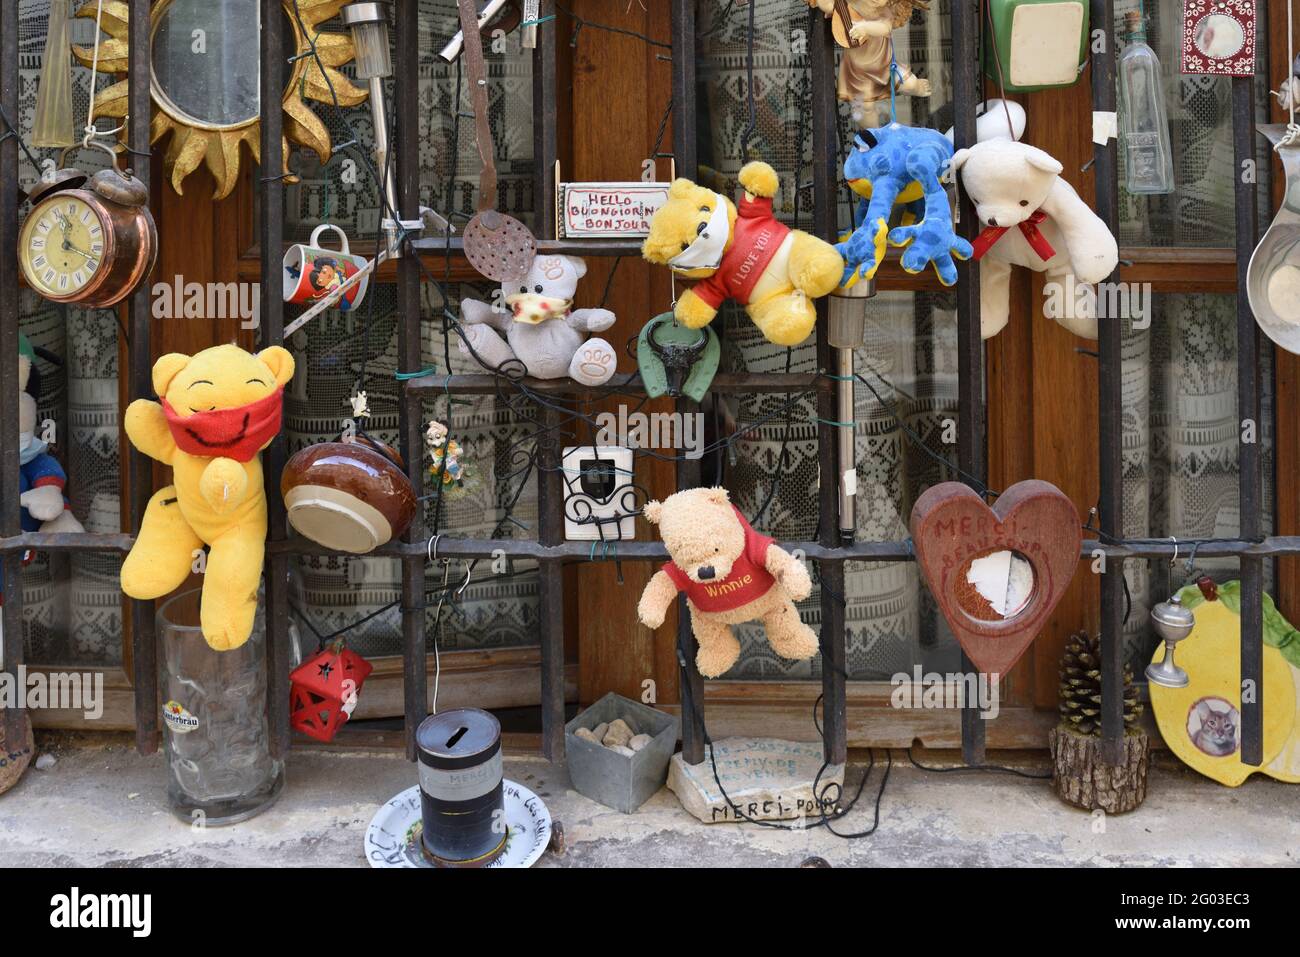 Curious or Unusual Townhouse Window Decorated with Knick-Knacks & Cuddly Toys in the Old Town Saint Remy de Provence Provence France Stock Photo